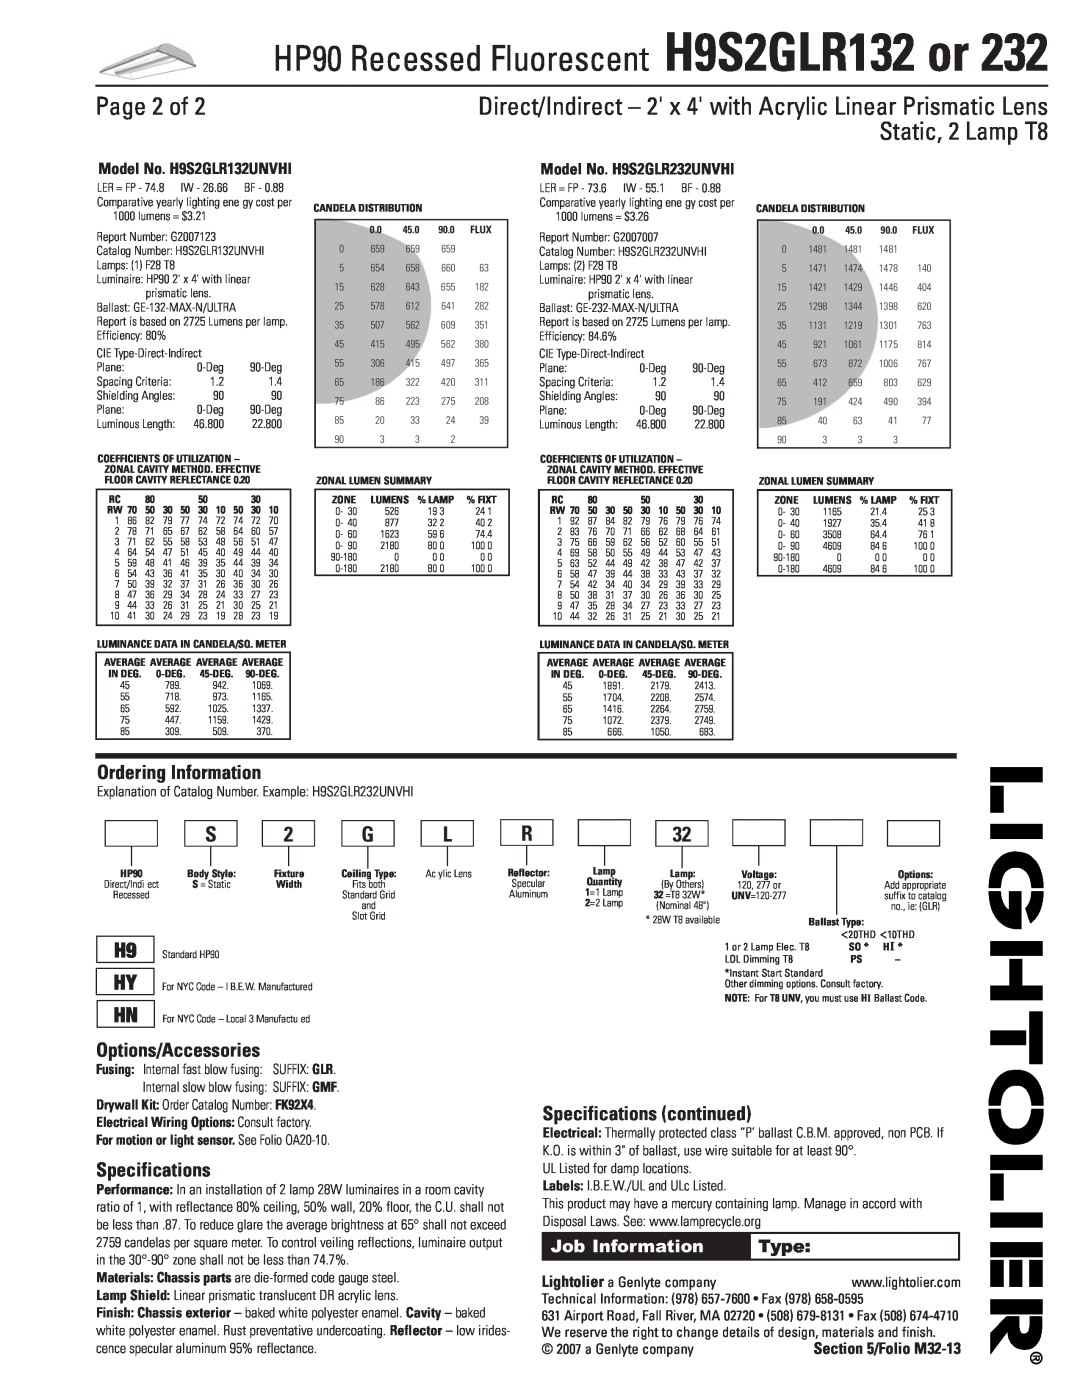 Lightolier H9S2GLR132 Page 2 of, Ordering Information, Options/Accessories, Specifications continued, Job Information 